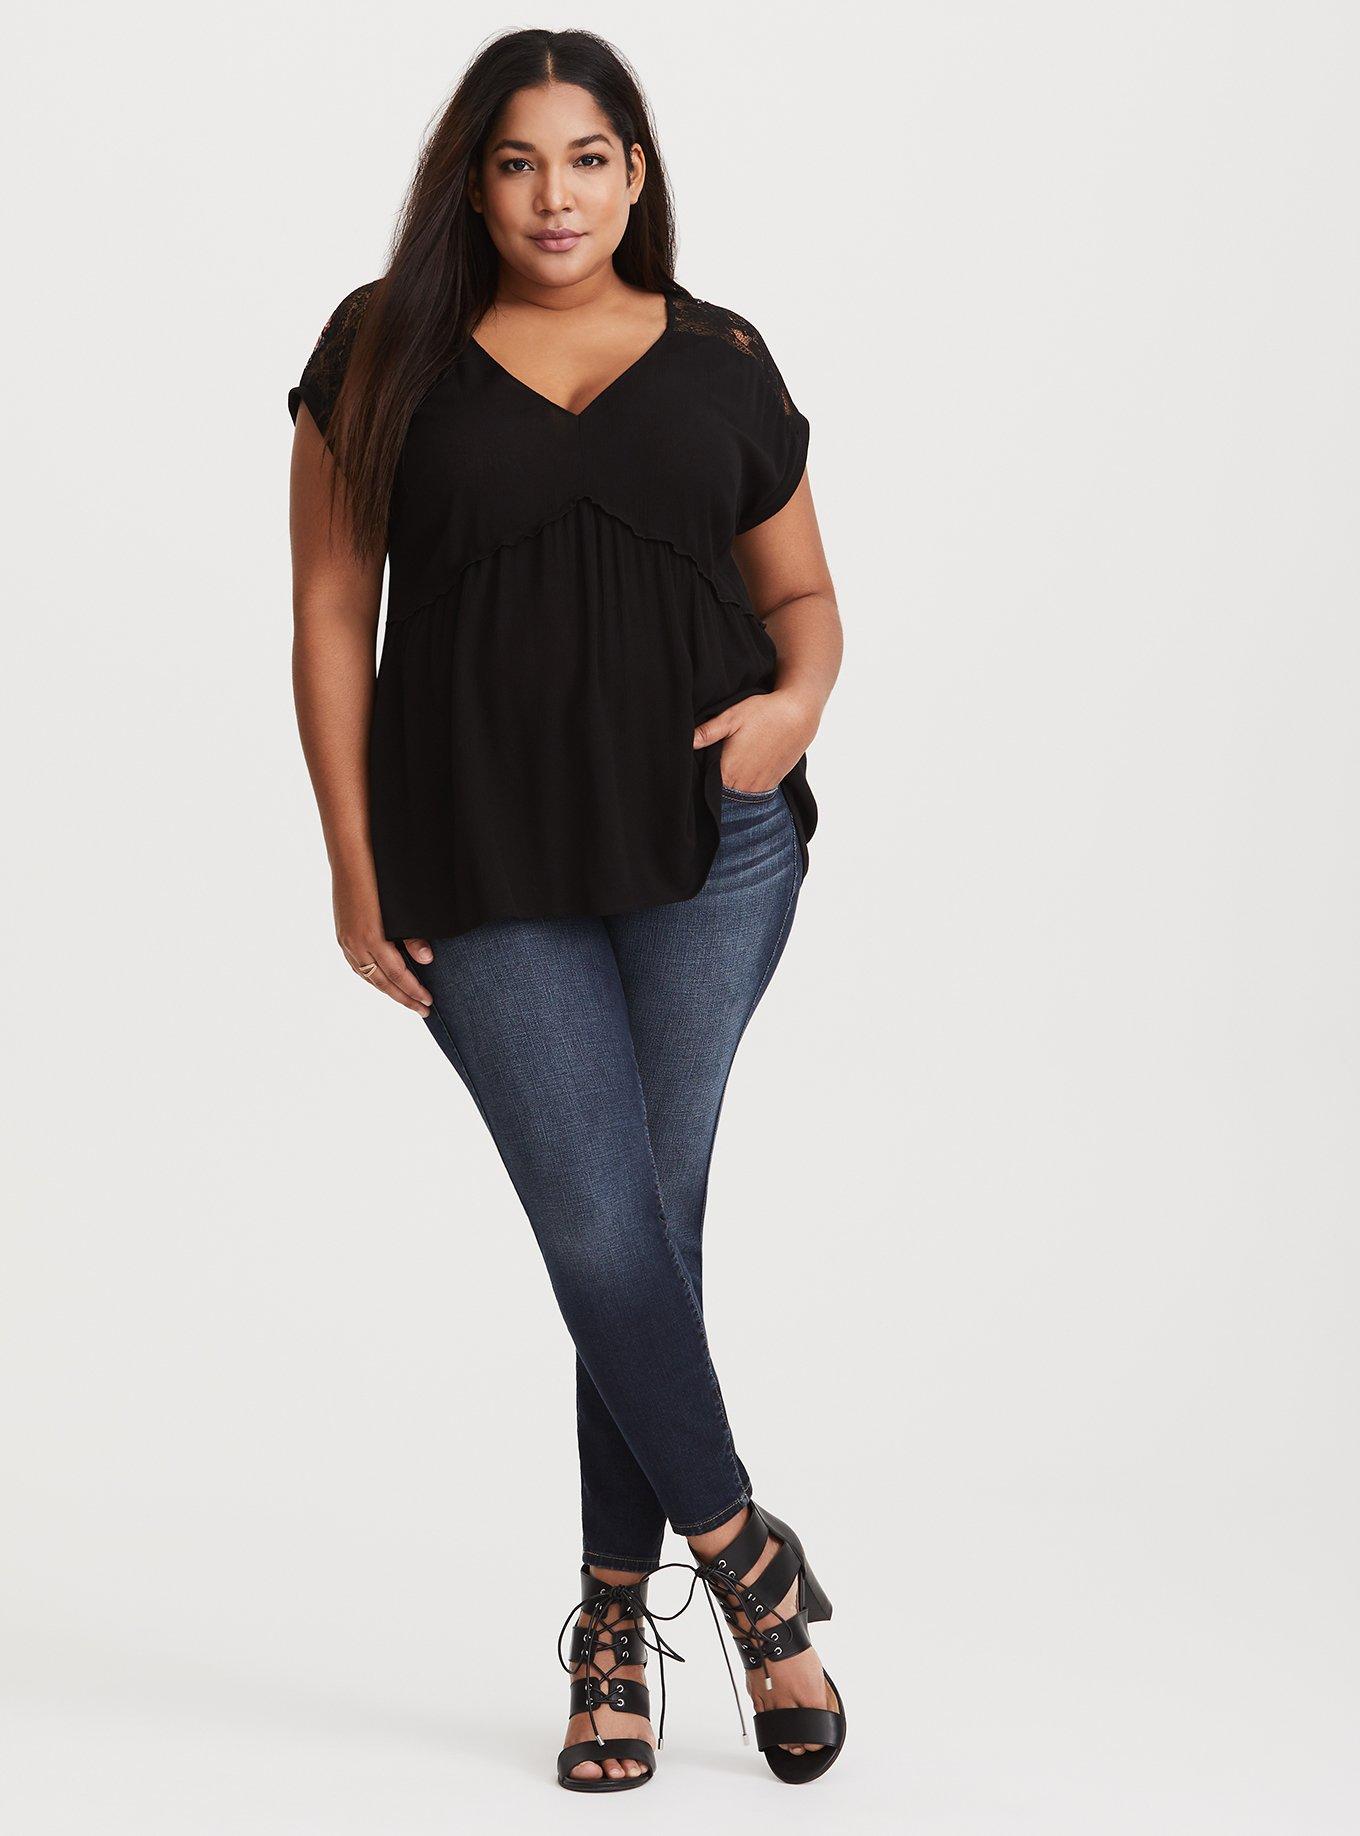 Plus Size - Black Embroidered Lace Woven Babydoll - Torrid